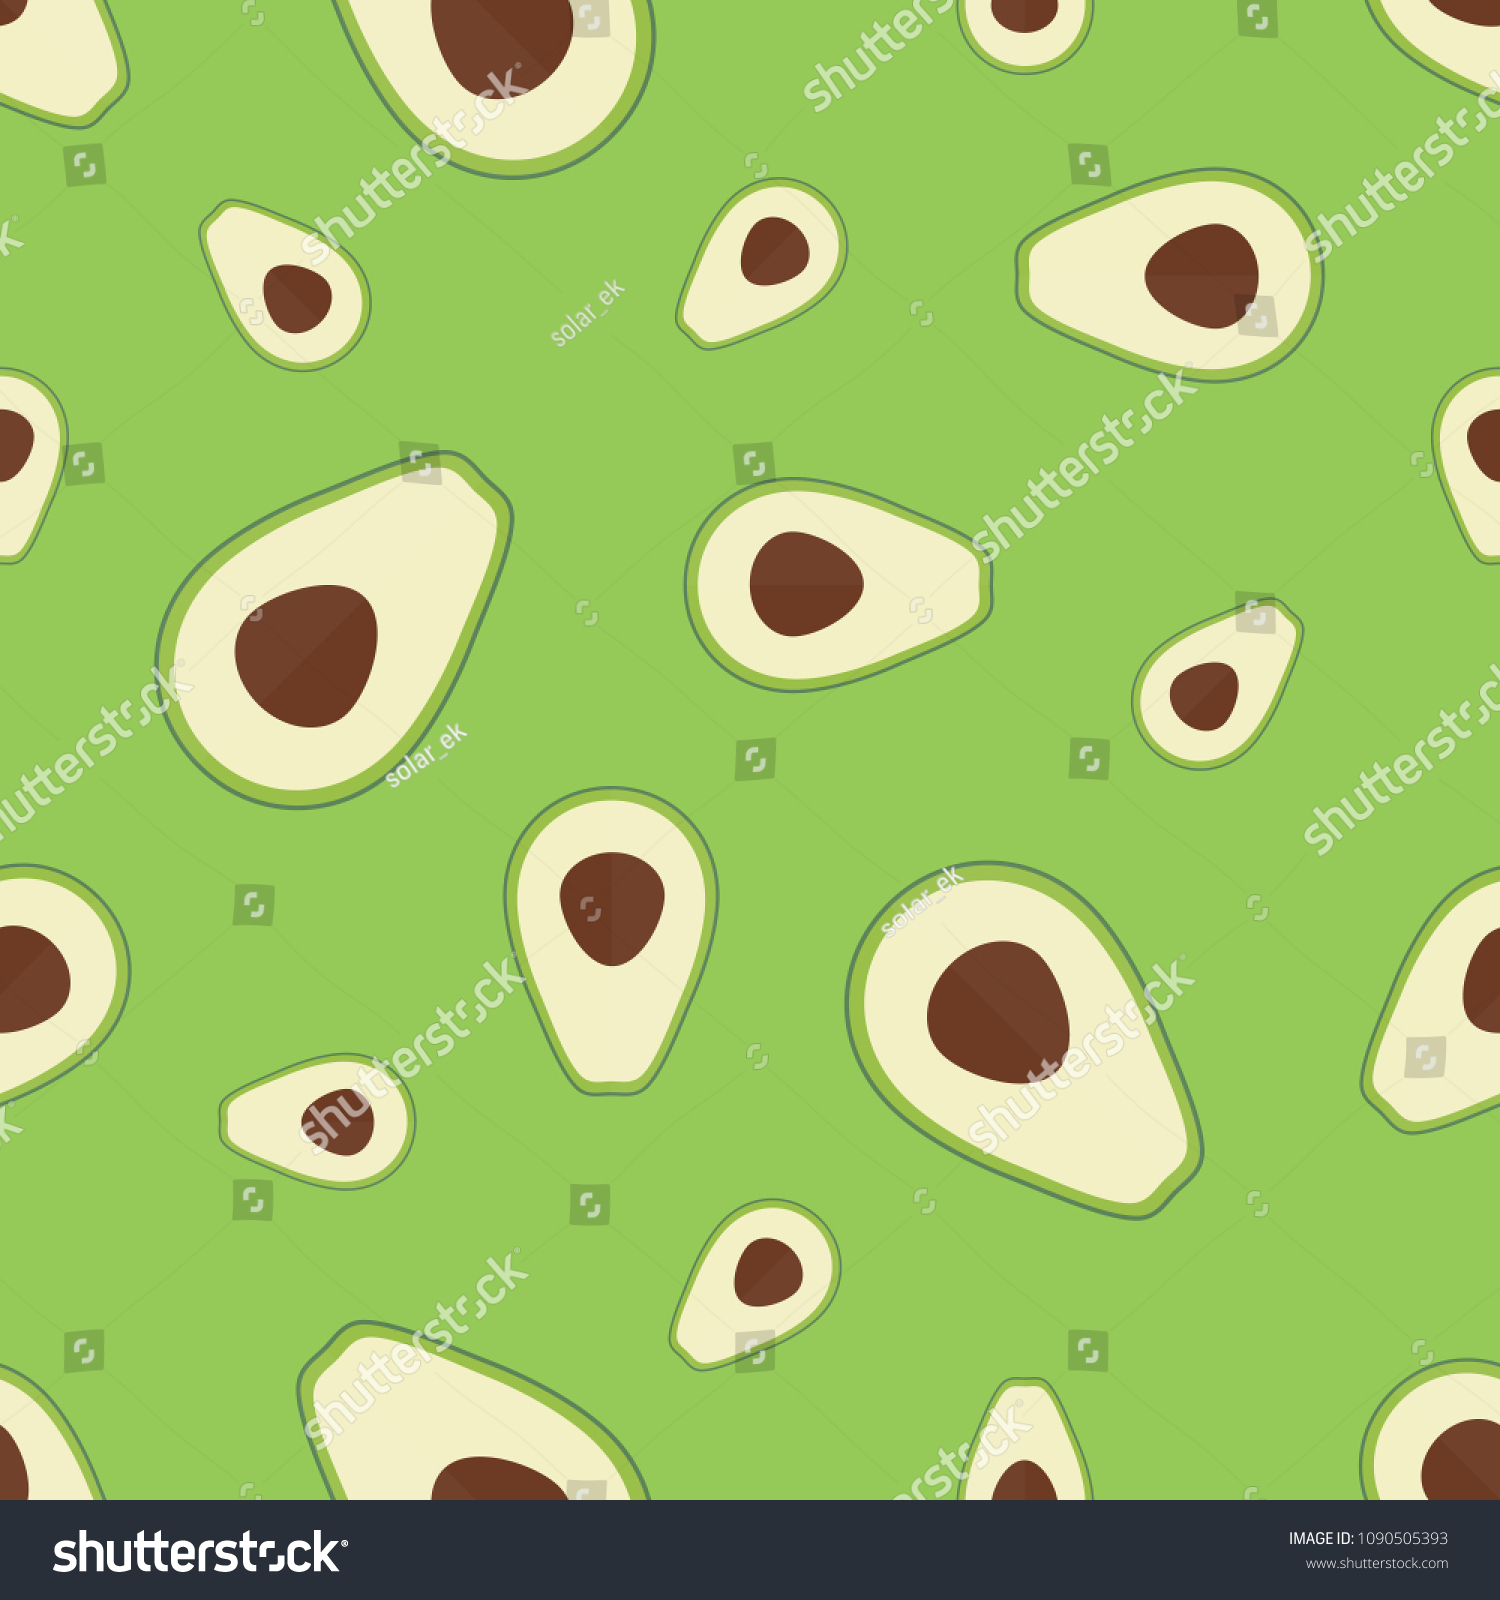 Healthy Food Avocado Background Seamless Pattern Stock Vector (Royalty ...